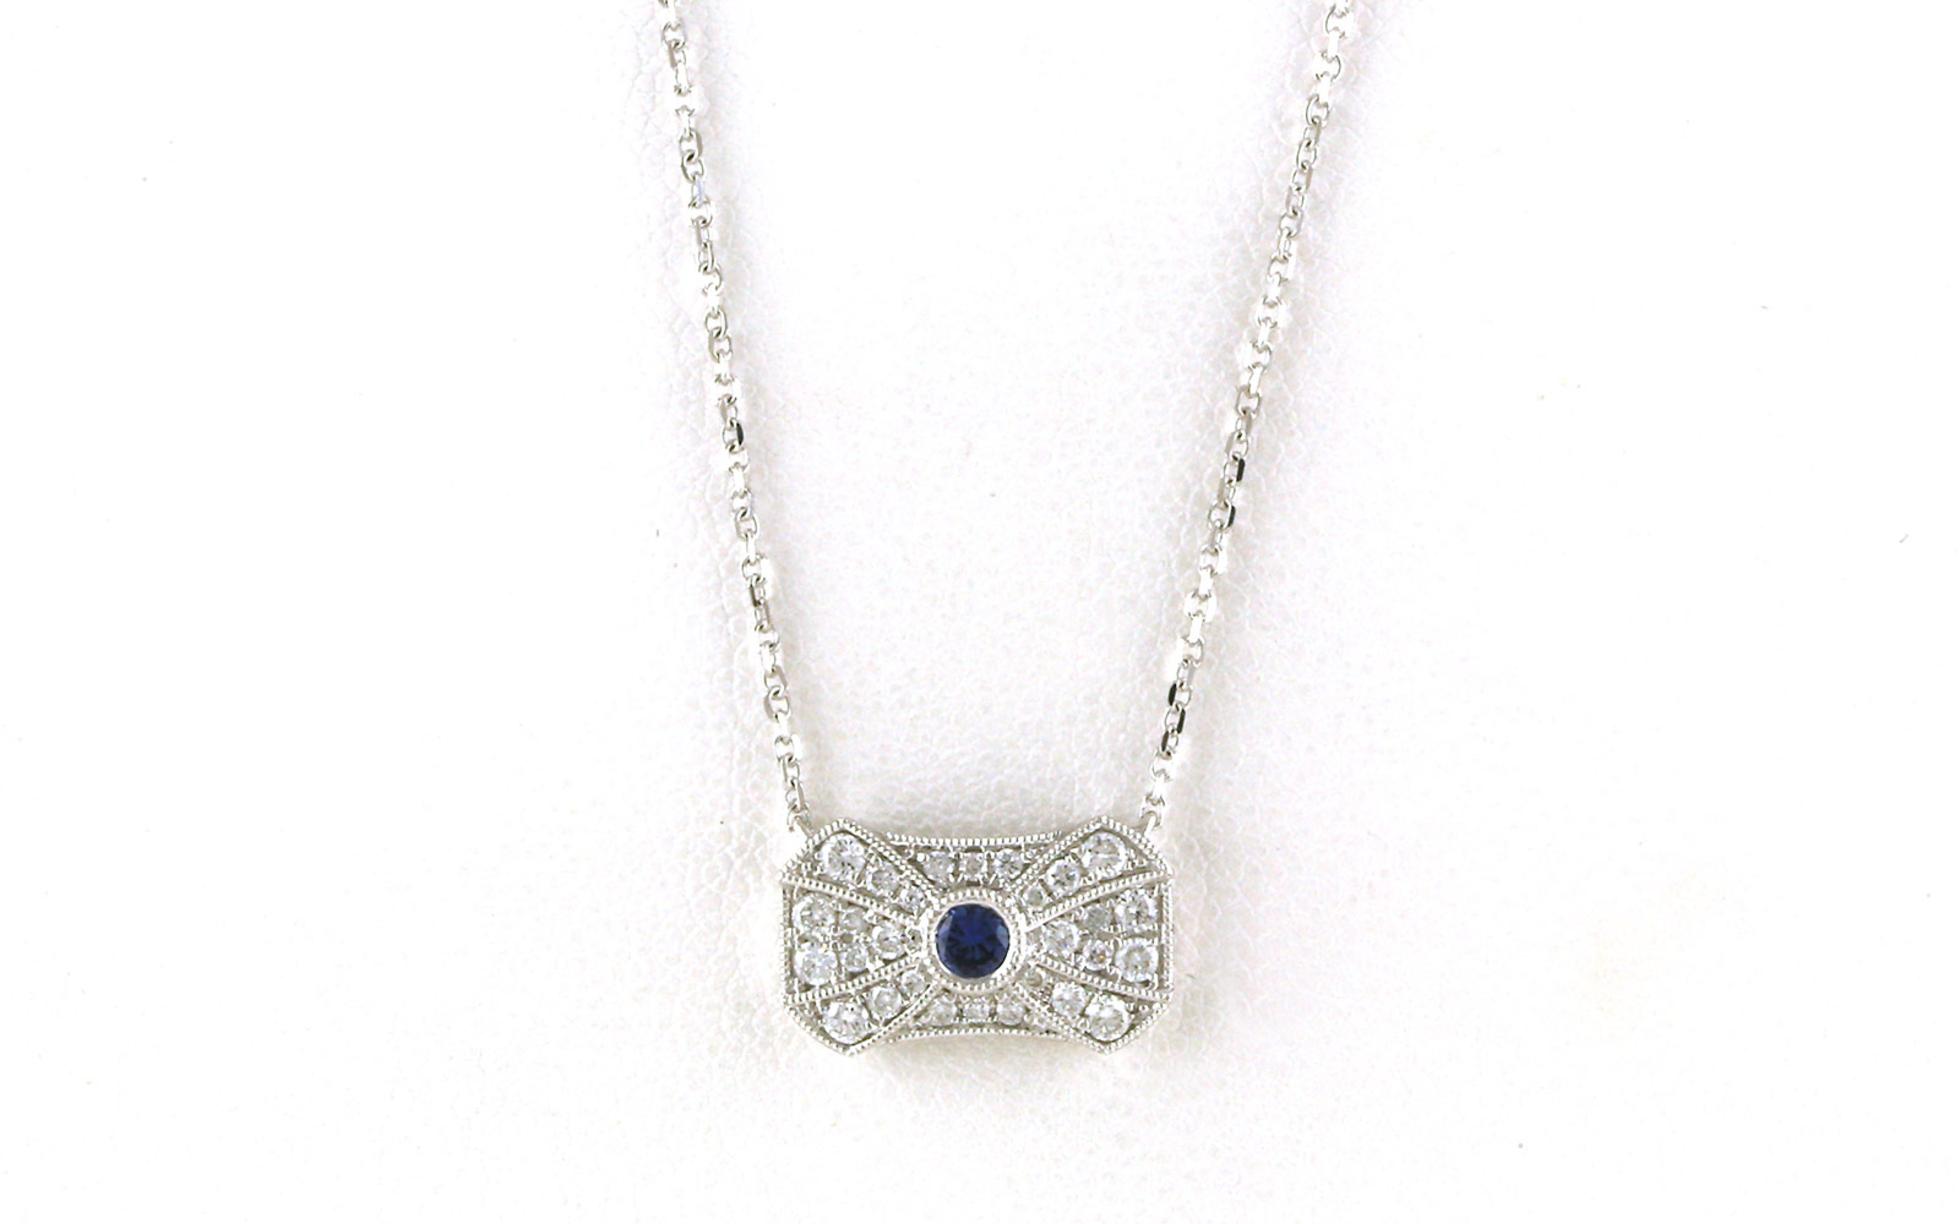 Vintage-style Rectangular Montana Yogo Sapphire and Diamond Necklace in White Gold (0.40cts TWT)